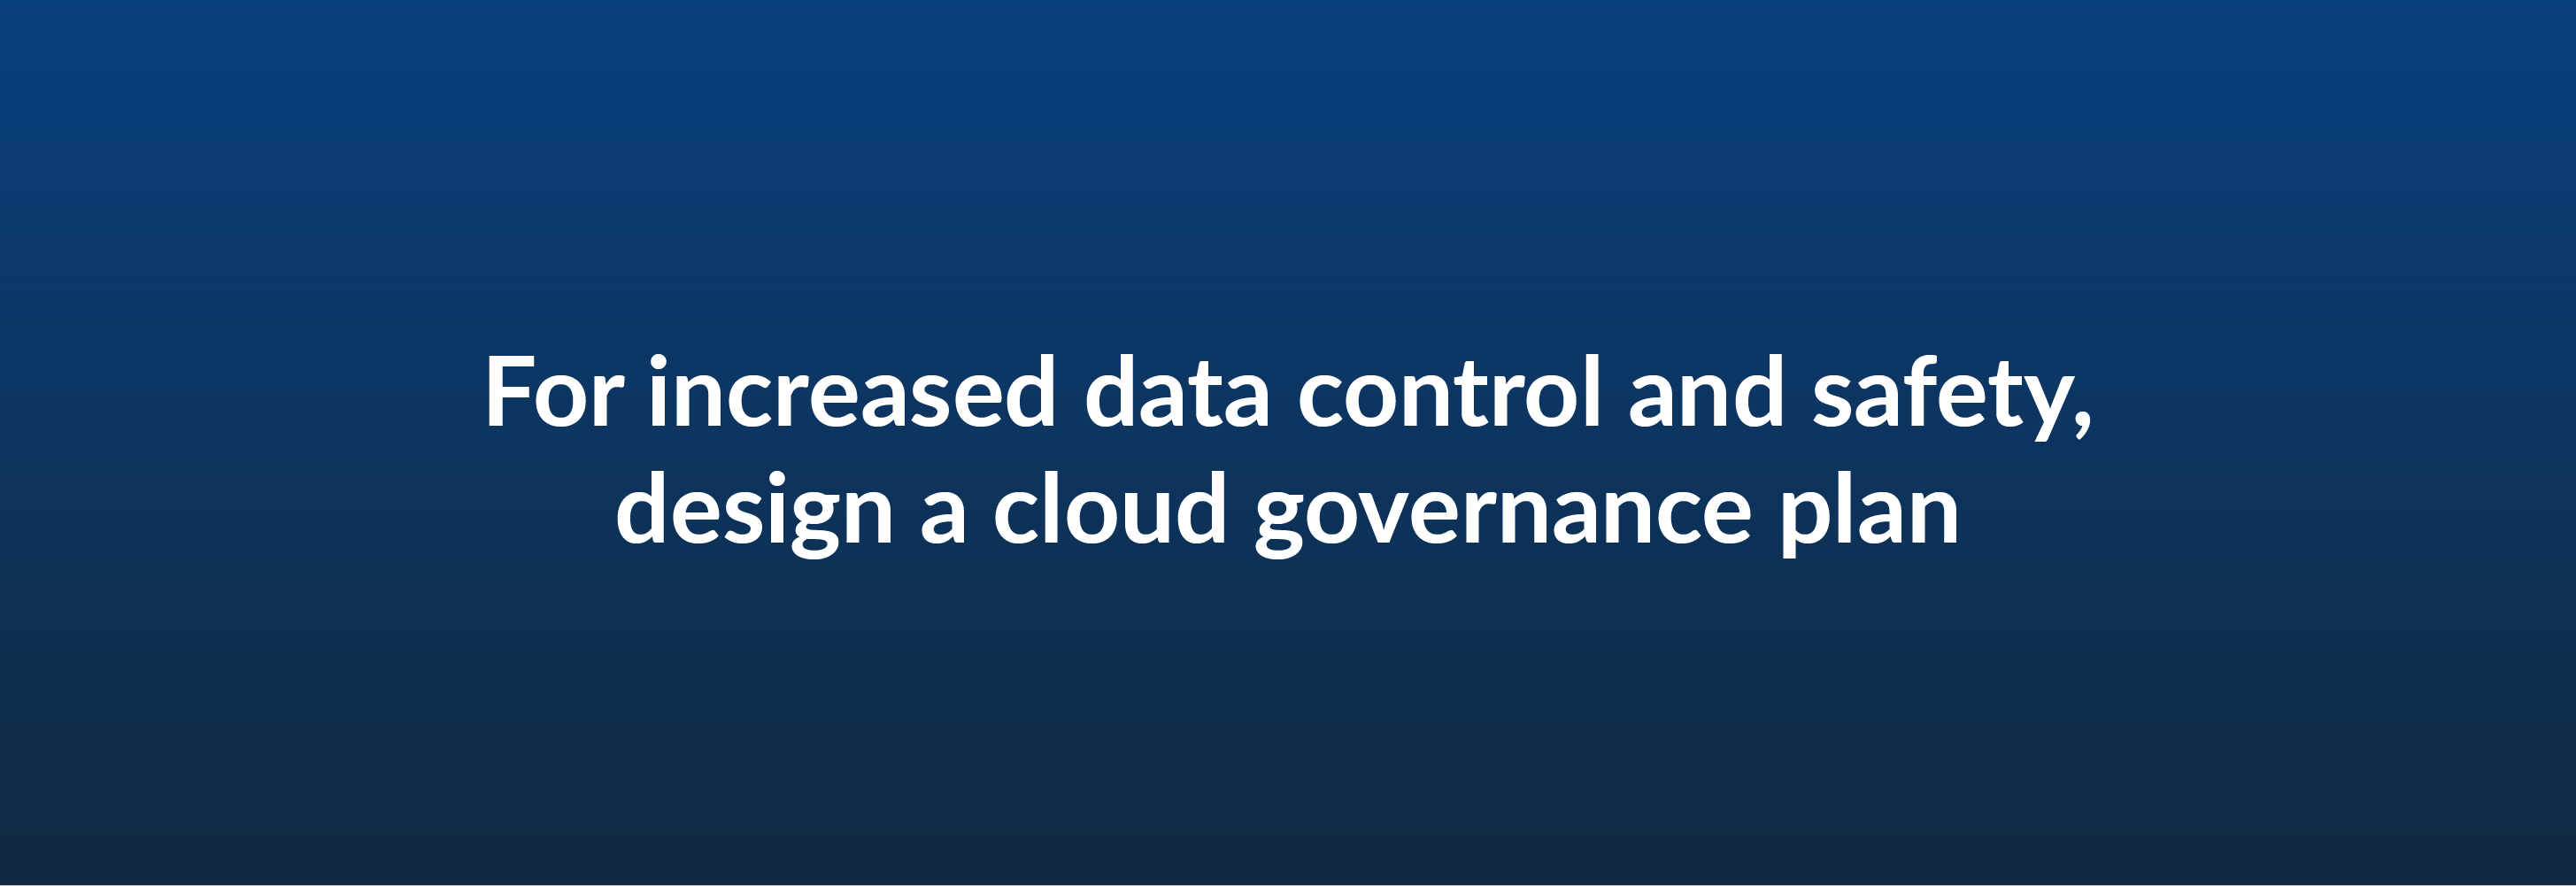 For increased data control and safety, design a cloud governance plan